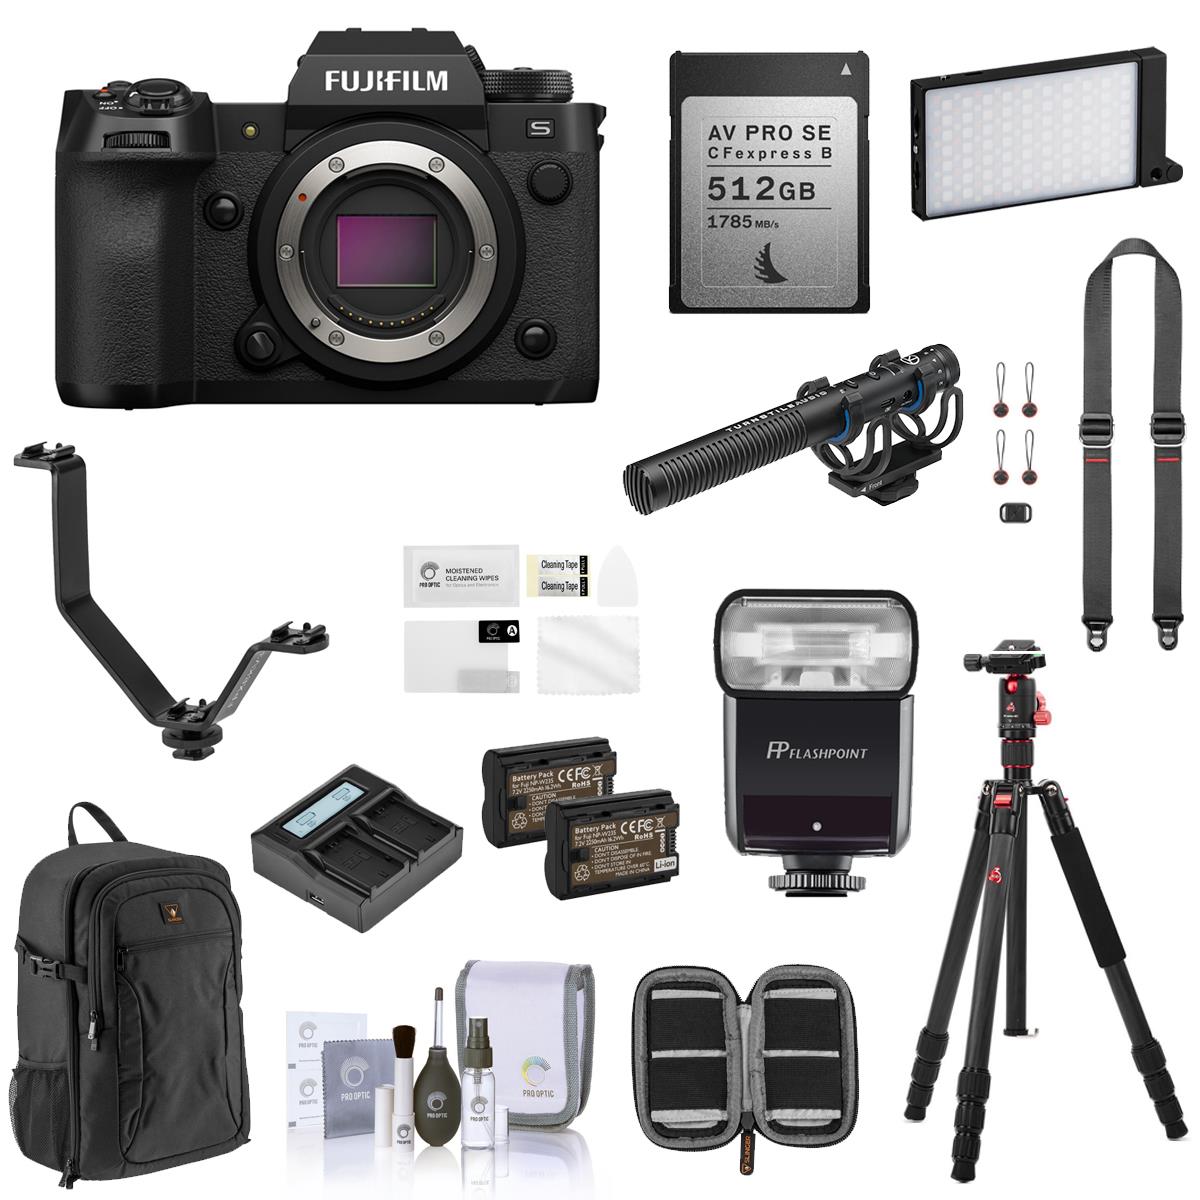 Image of Fujifilm X-H2S Mirrorless Digital Camera Body with Complete Accessories Kit